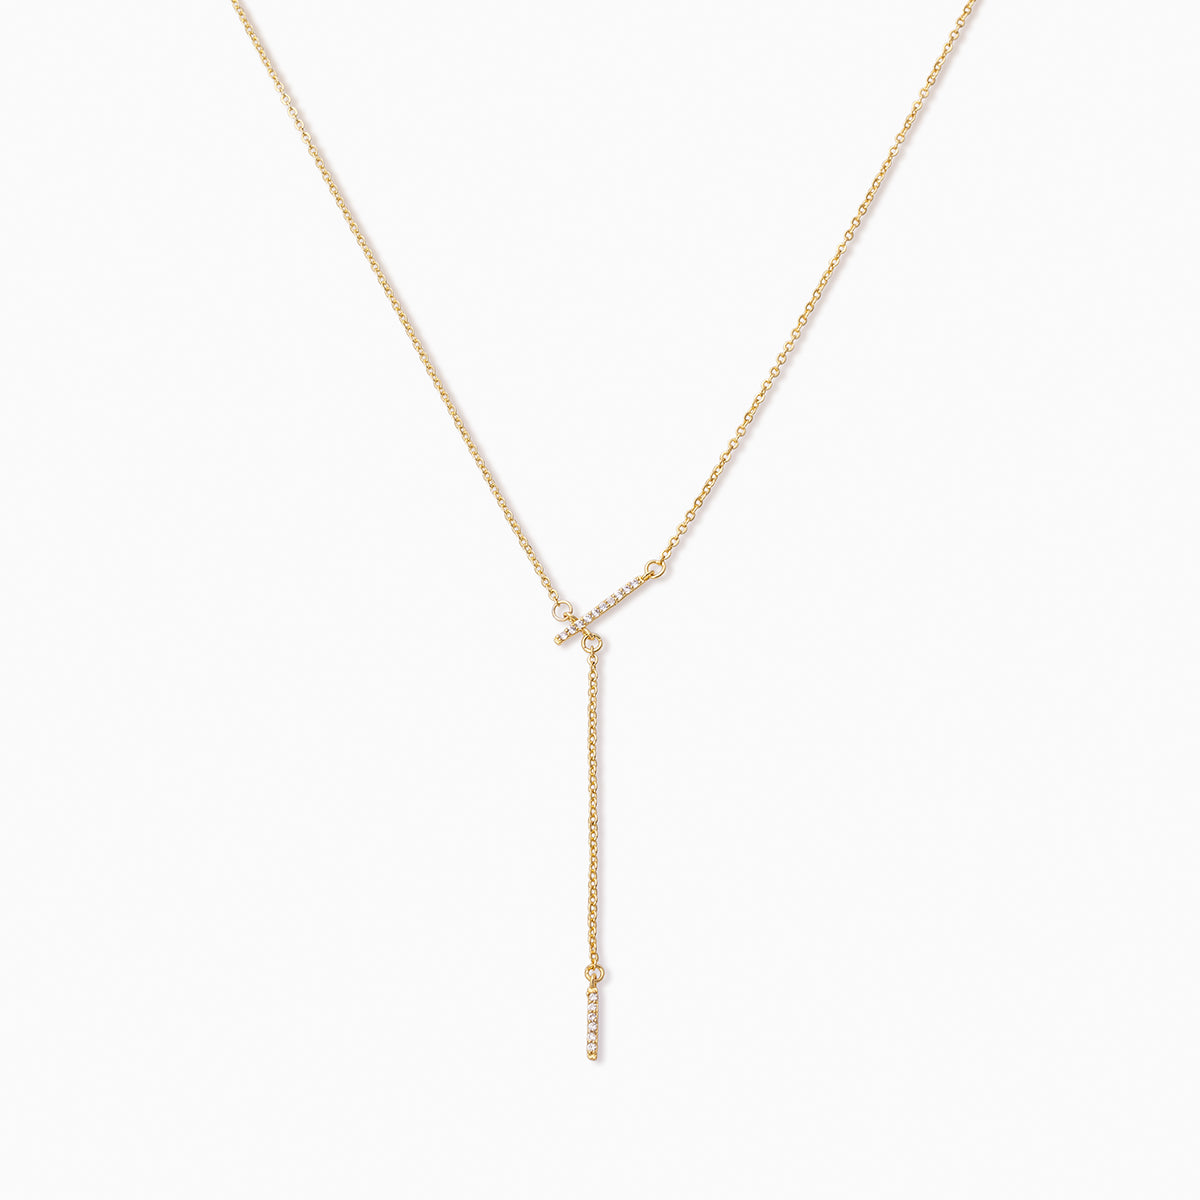 Imperfect Necklace | Gold | Product Image | Uncommon James